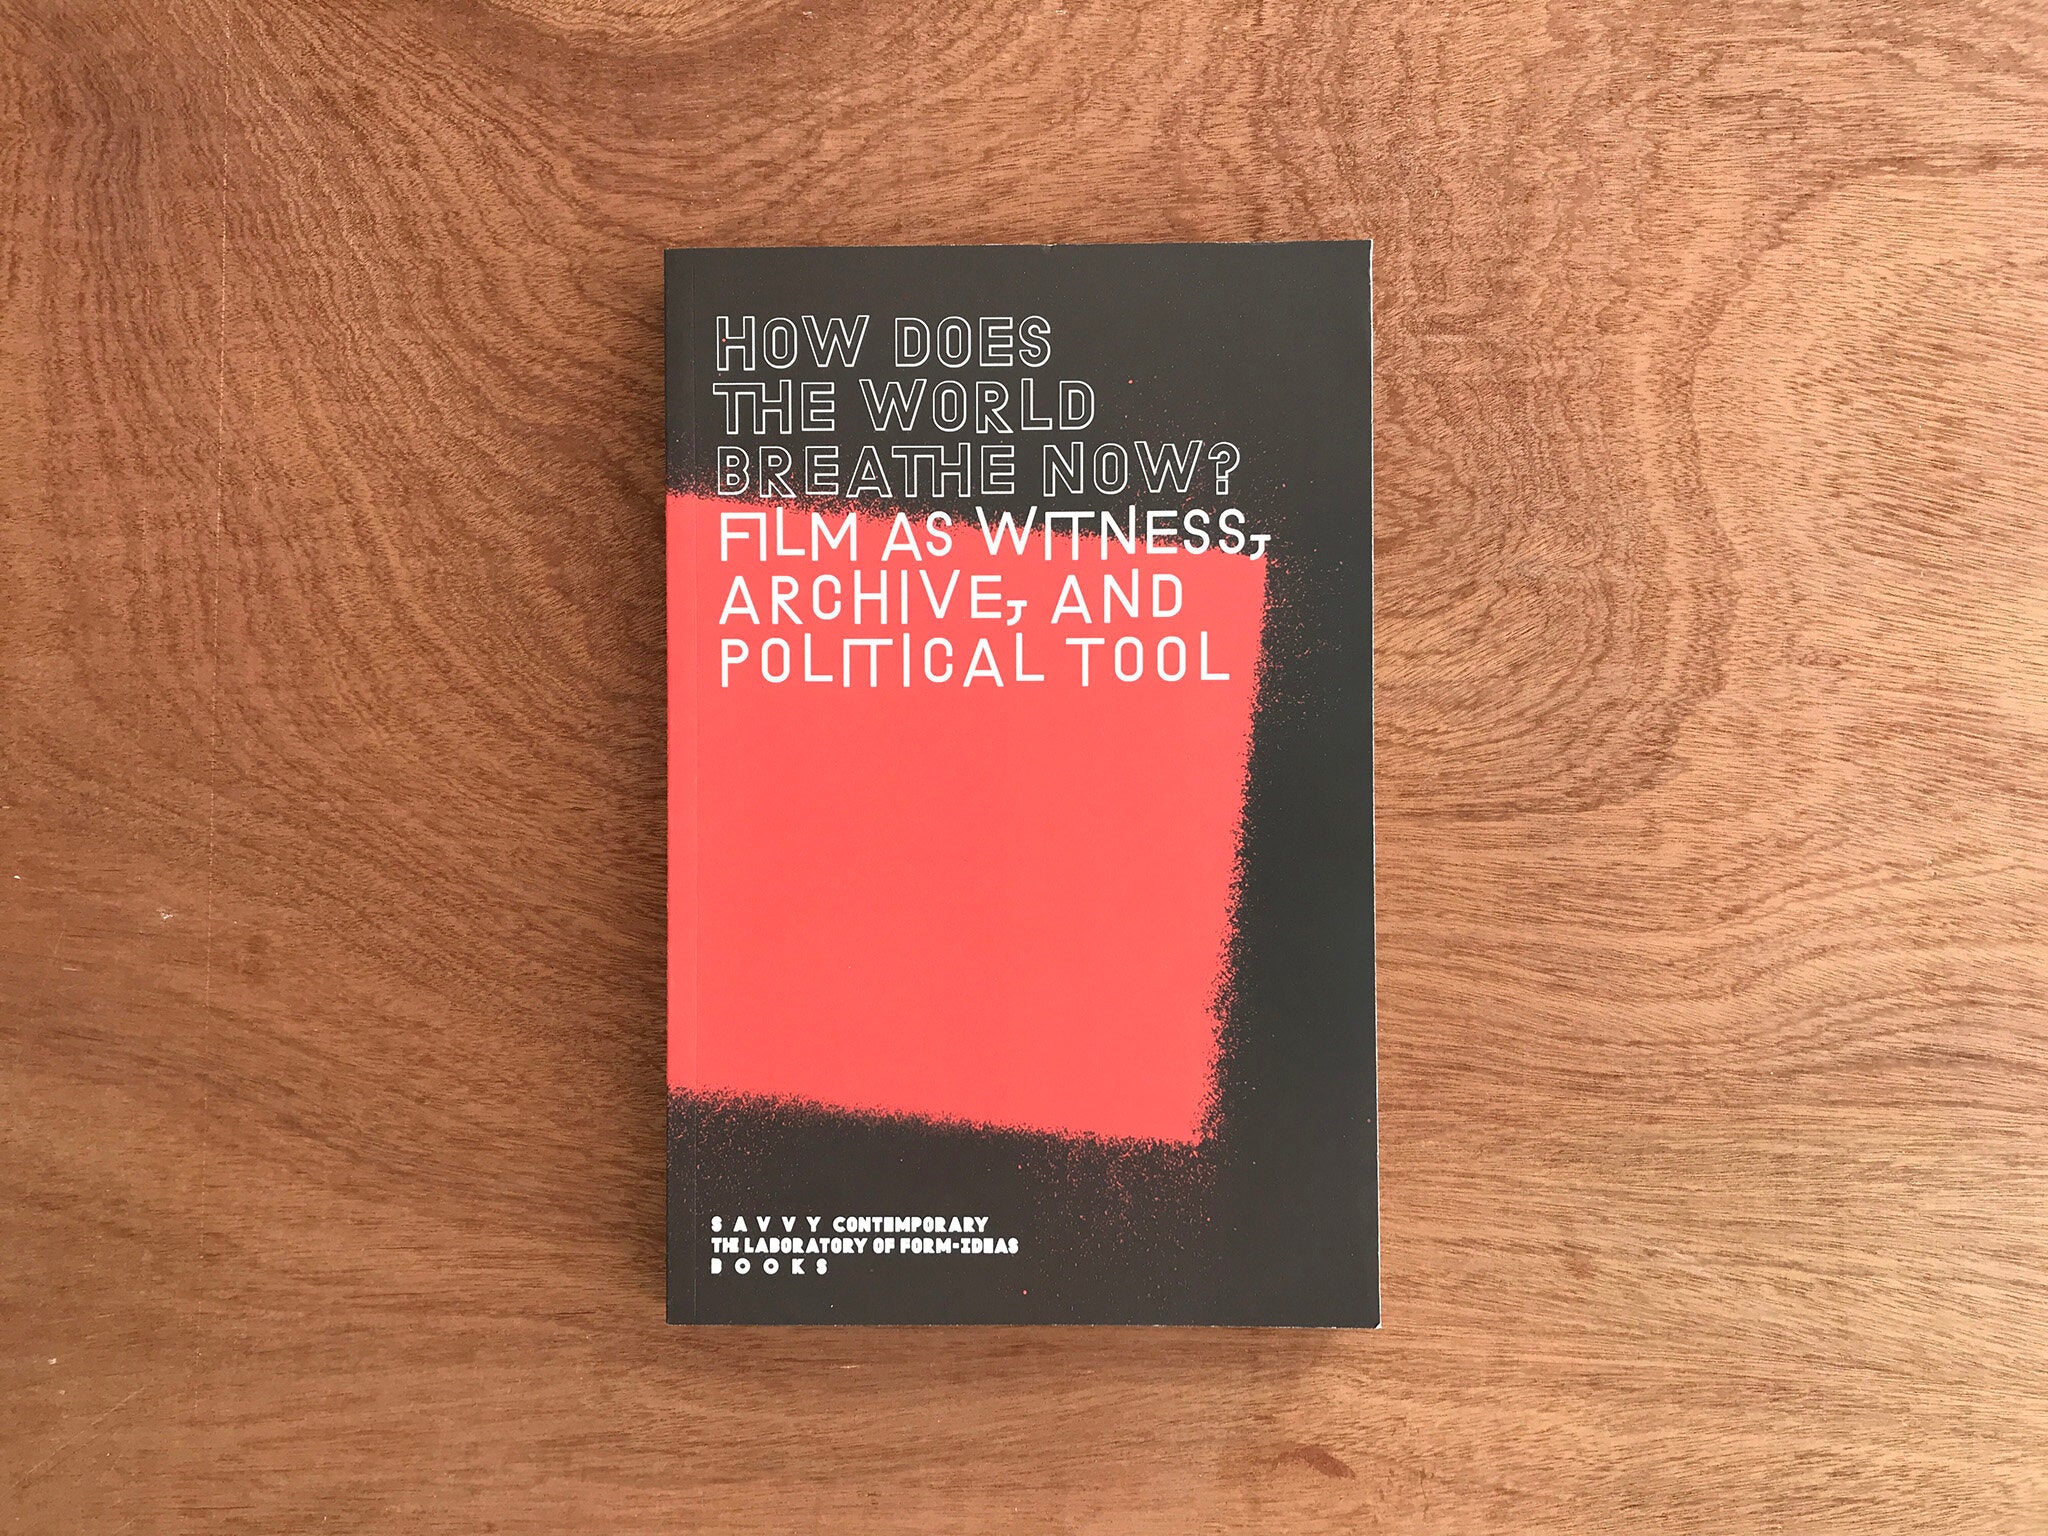 HOW DOES THE WORLD BREATHE NOW? – FILM AS WITNESS, ARCHIVE, AND POLITICAL TOOL